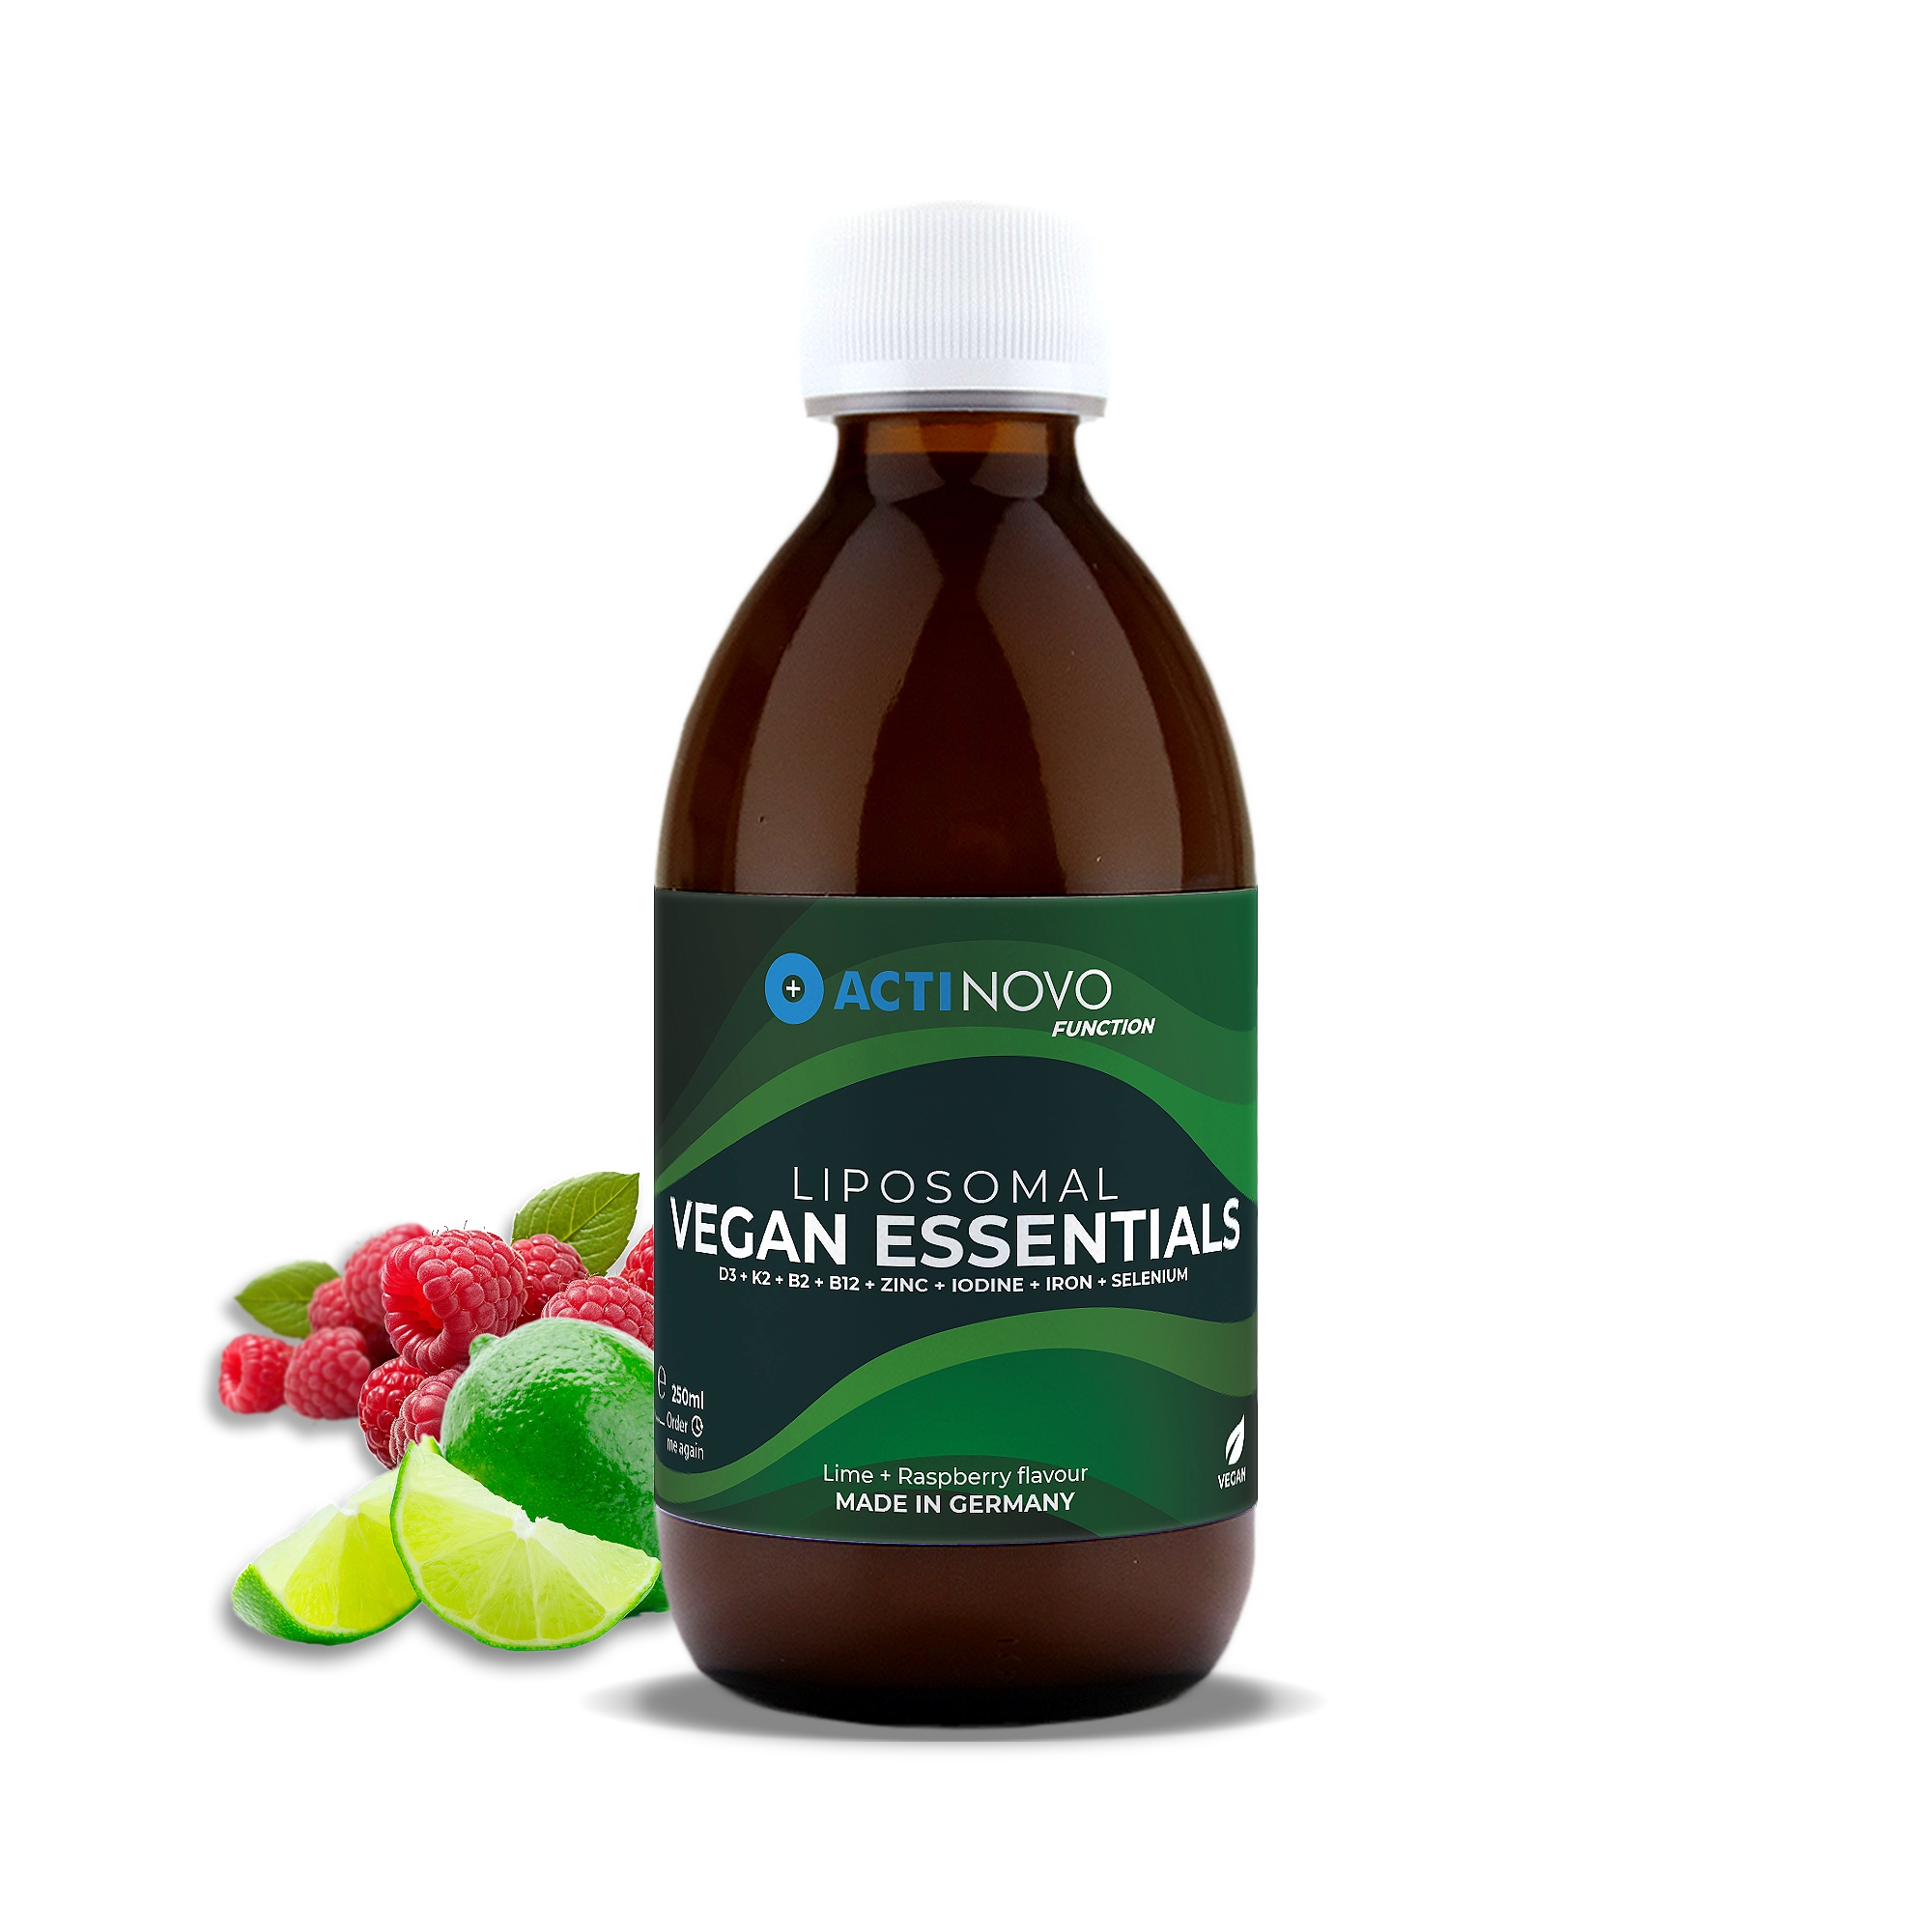 Product photo of liposomal Vegan Essentials with raspberries and lime